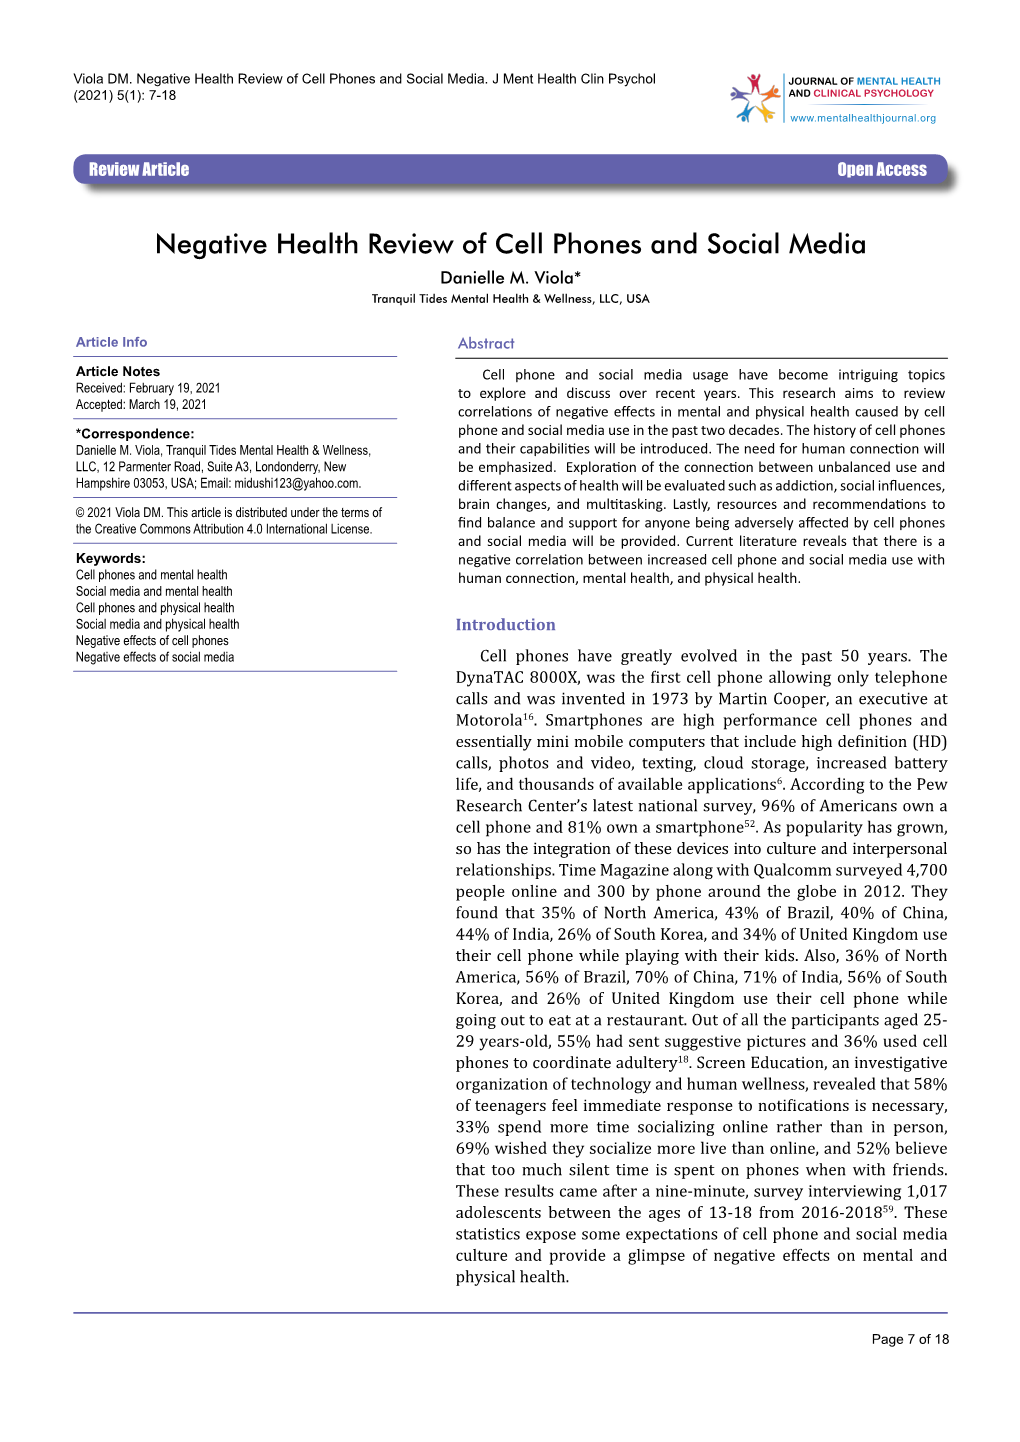 Negative Health Review of Cell Phones and Social Media